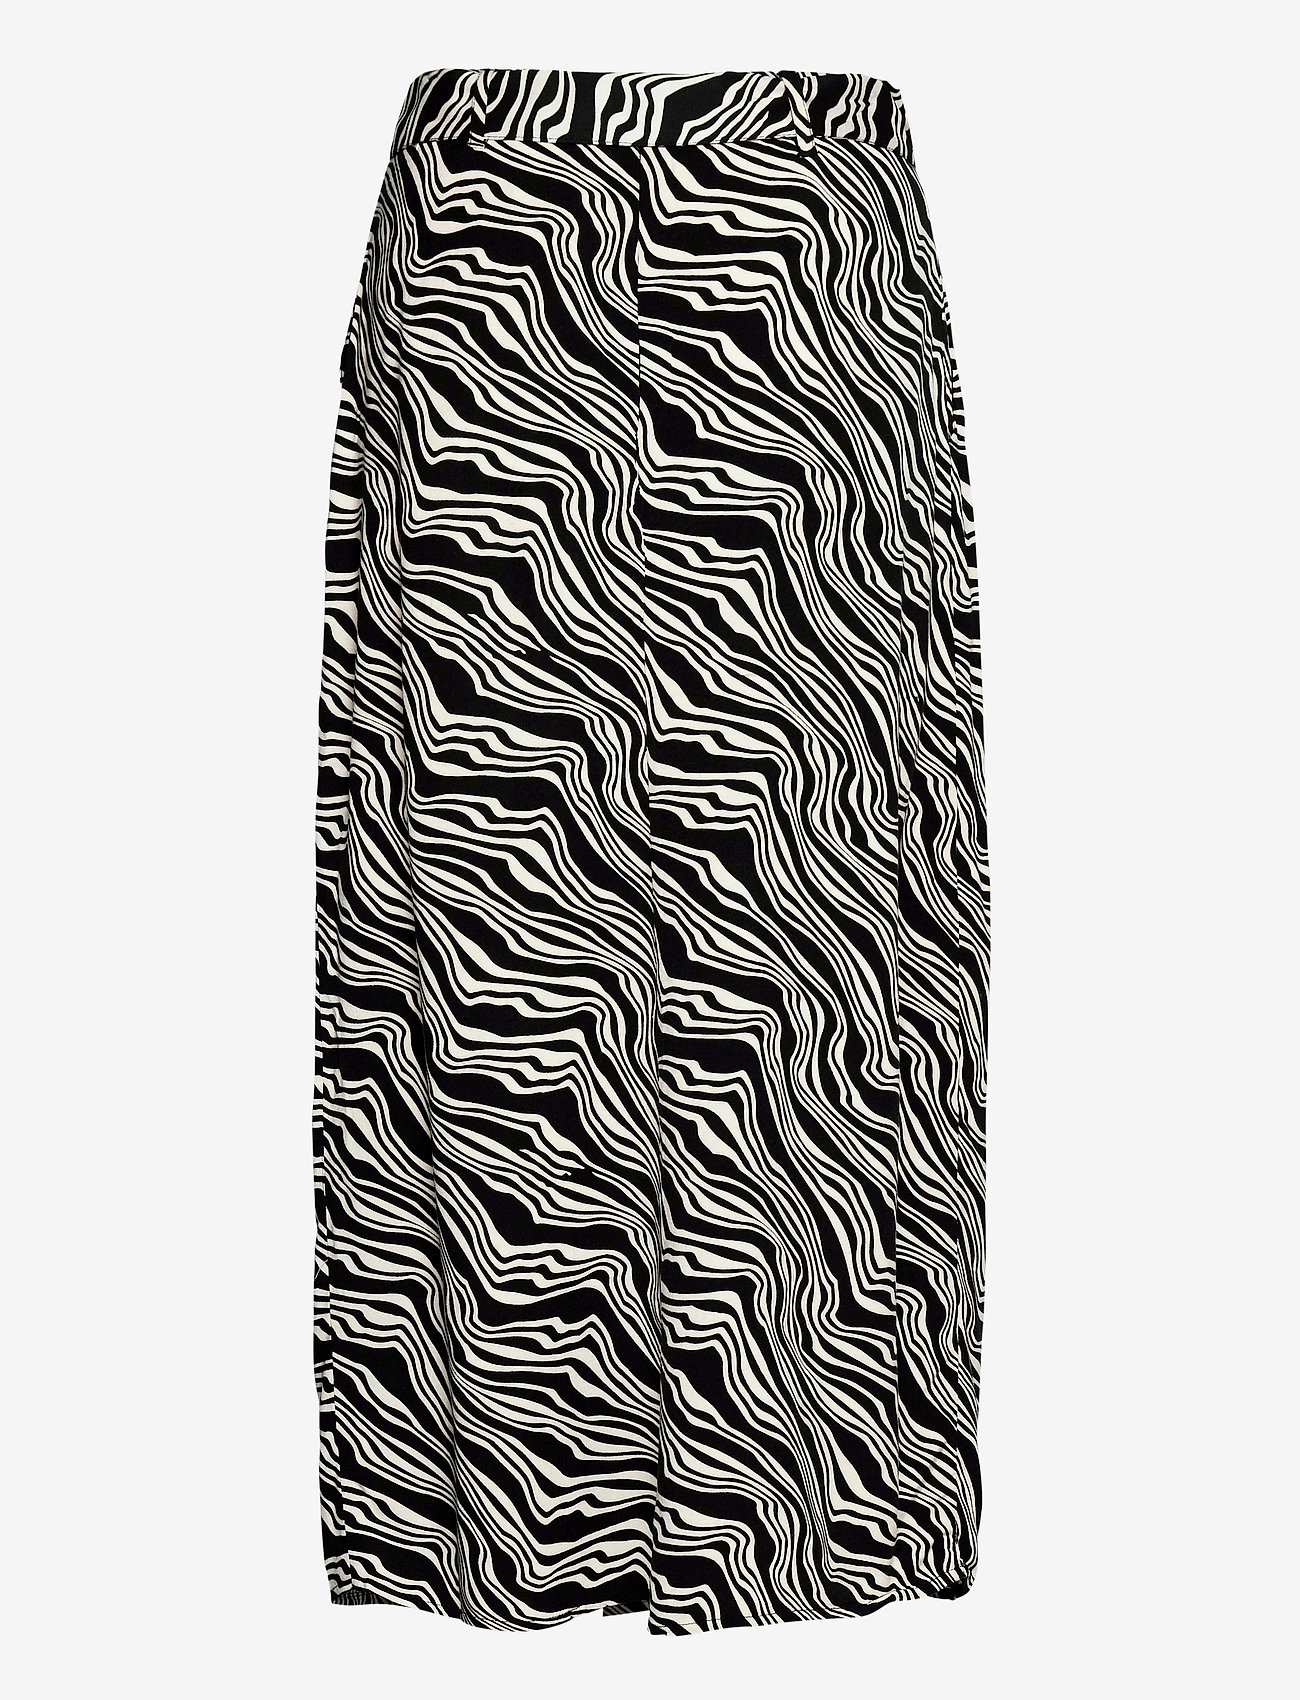 Tom Tailor - skirt with with wrap detail - maxi nederdele - black wavy design - 1